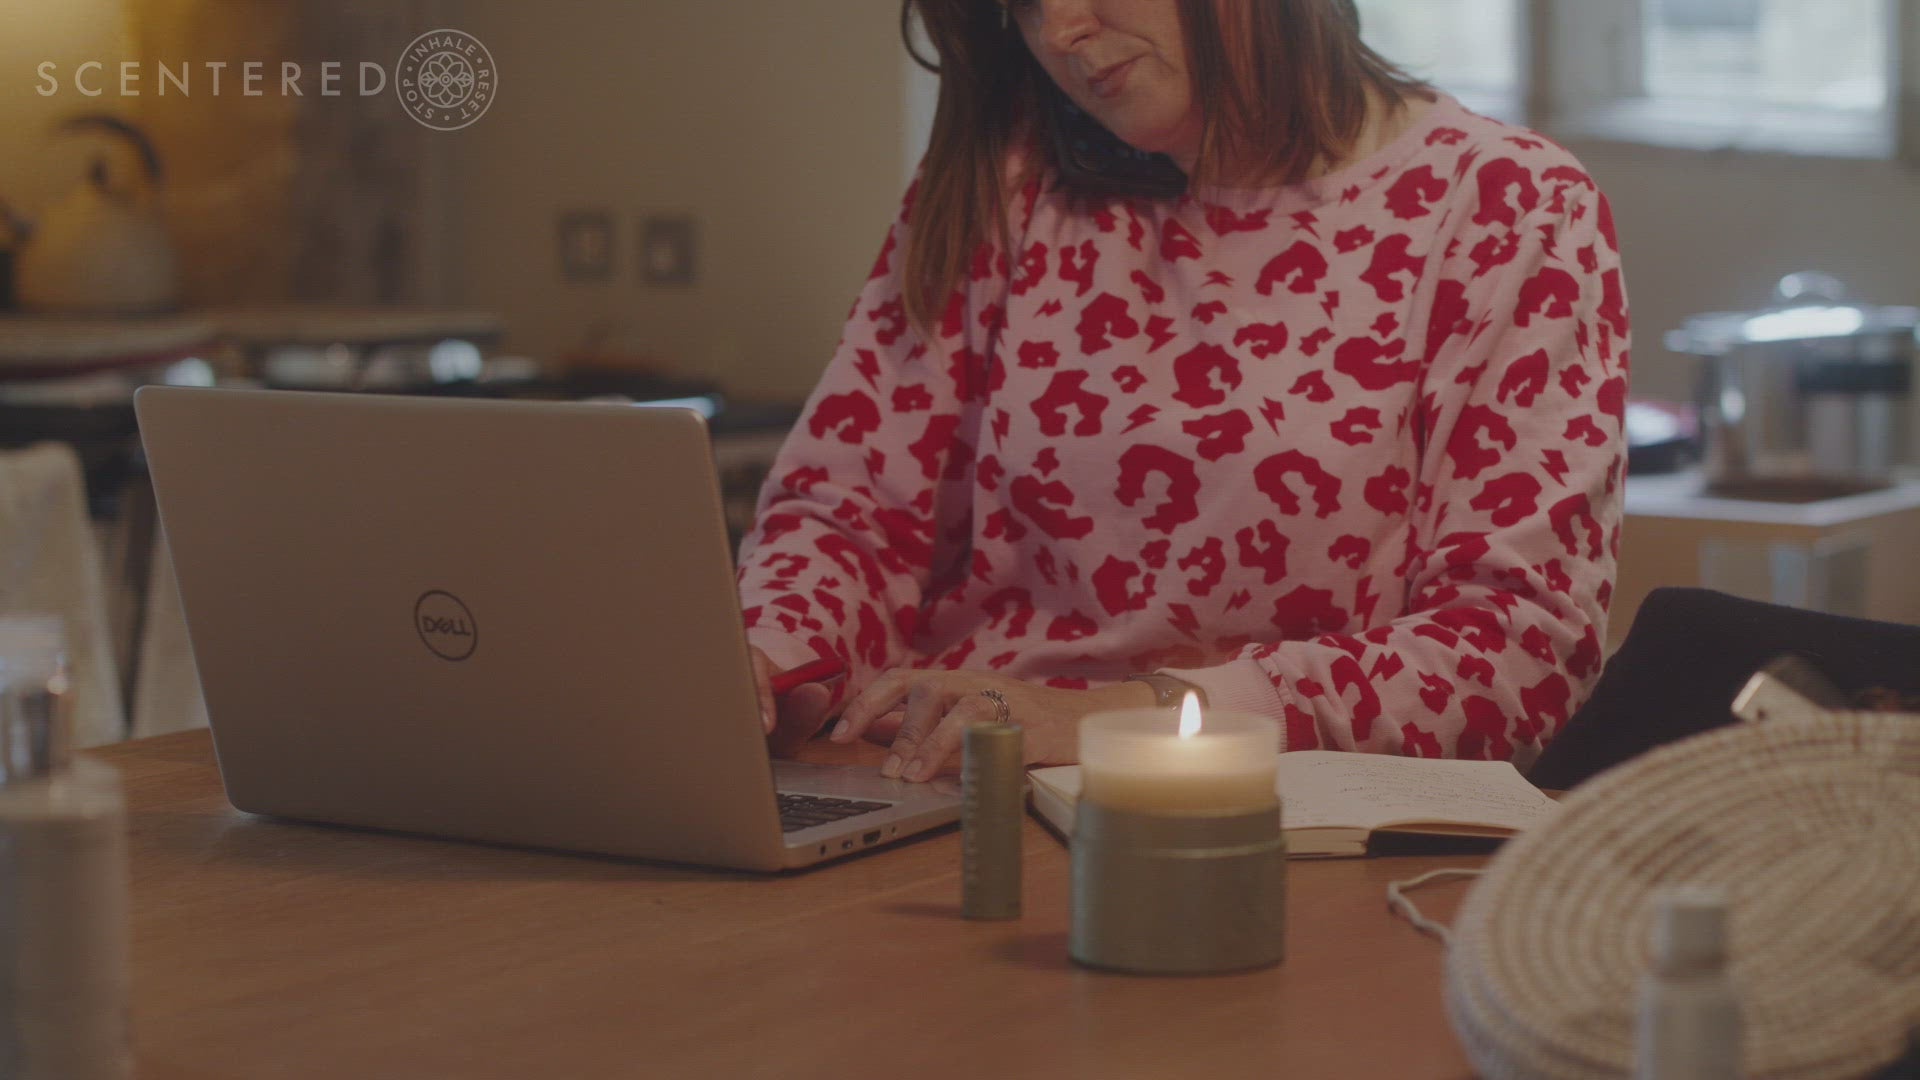 Video showing a lady working at a lap top, writing then stops to apply the Scentered De-Stress Calm Aromatherapy Balm, she stops inhales the essential oils of Mandarin, Neroli and Camomile and resets and calmly places the balm down next to the glowing candle, paper and pen.   The Scentered logo including the words Scentered and Stop, Inhale, Reset; then appears to finish the video.